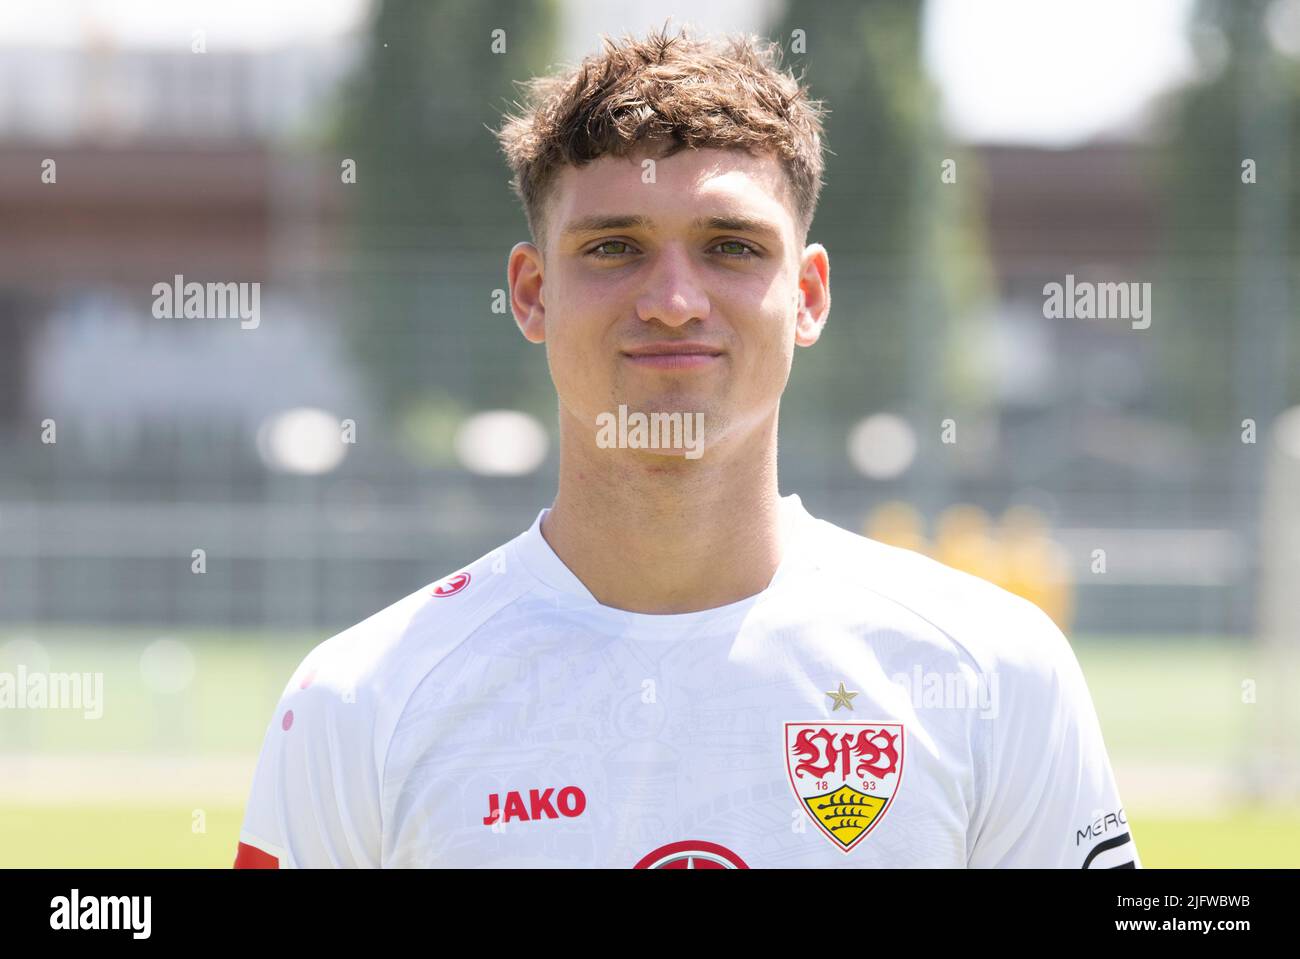 Mateo Klimowicz of Stuttgart turns down Germany call-up, could